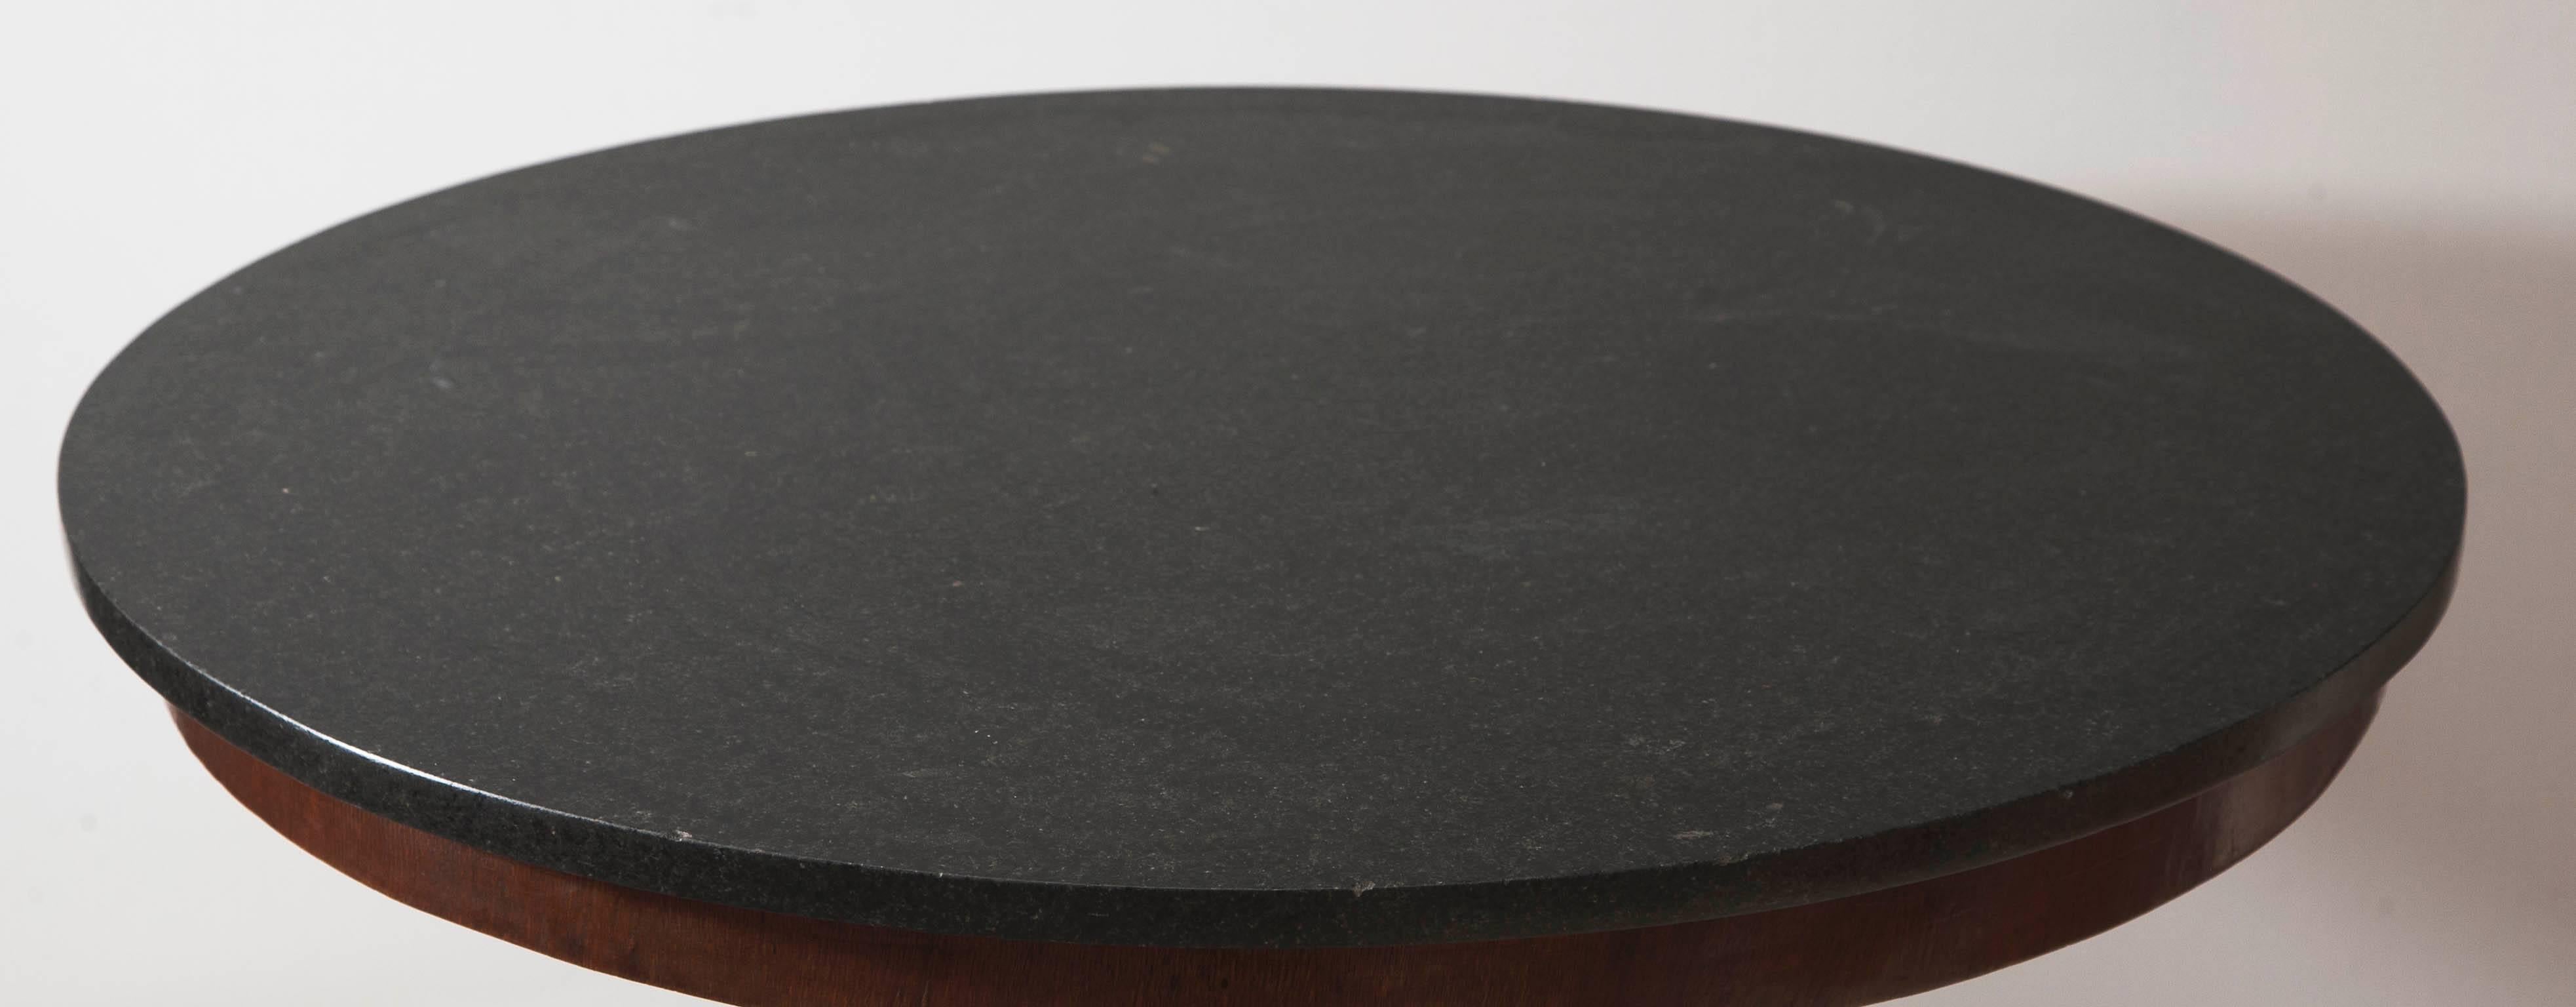 Mahogany and mahogany veneer with black fossil marble top.

Handsome and plain antique round center table.